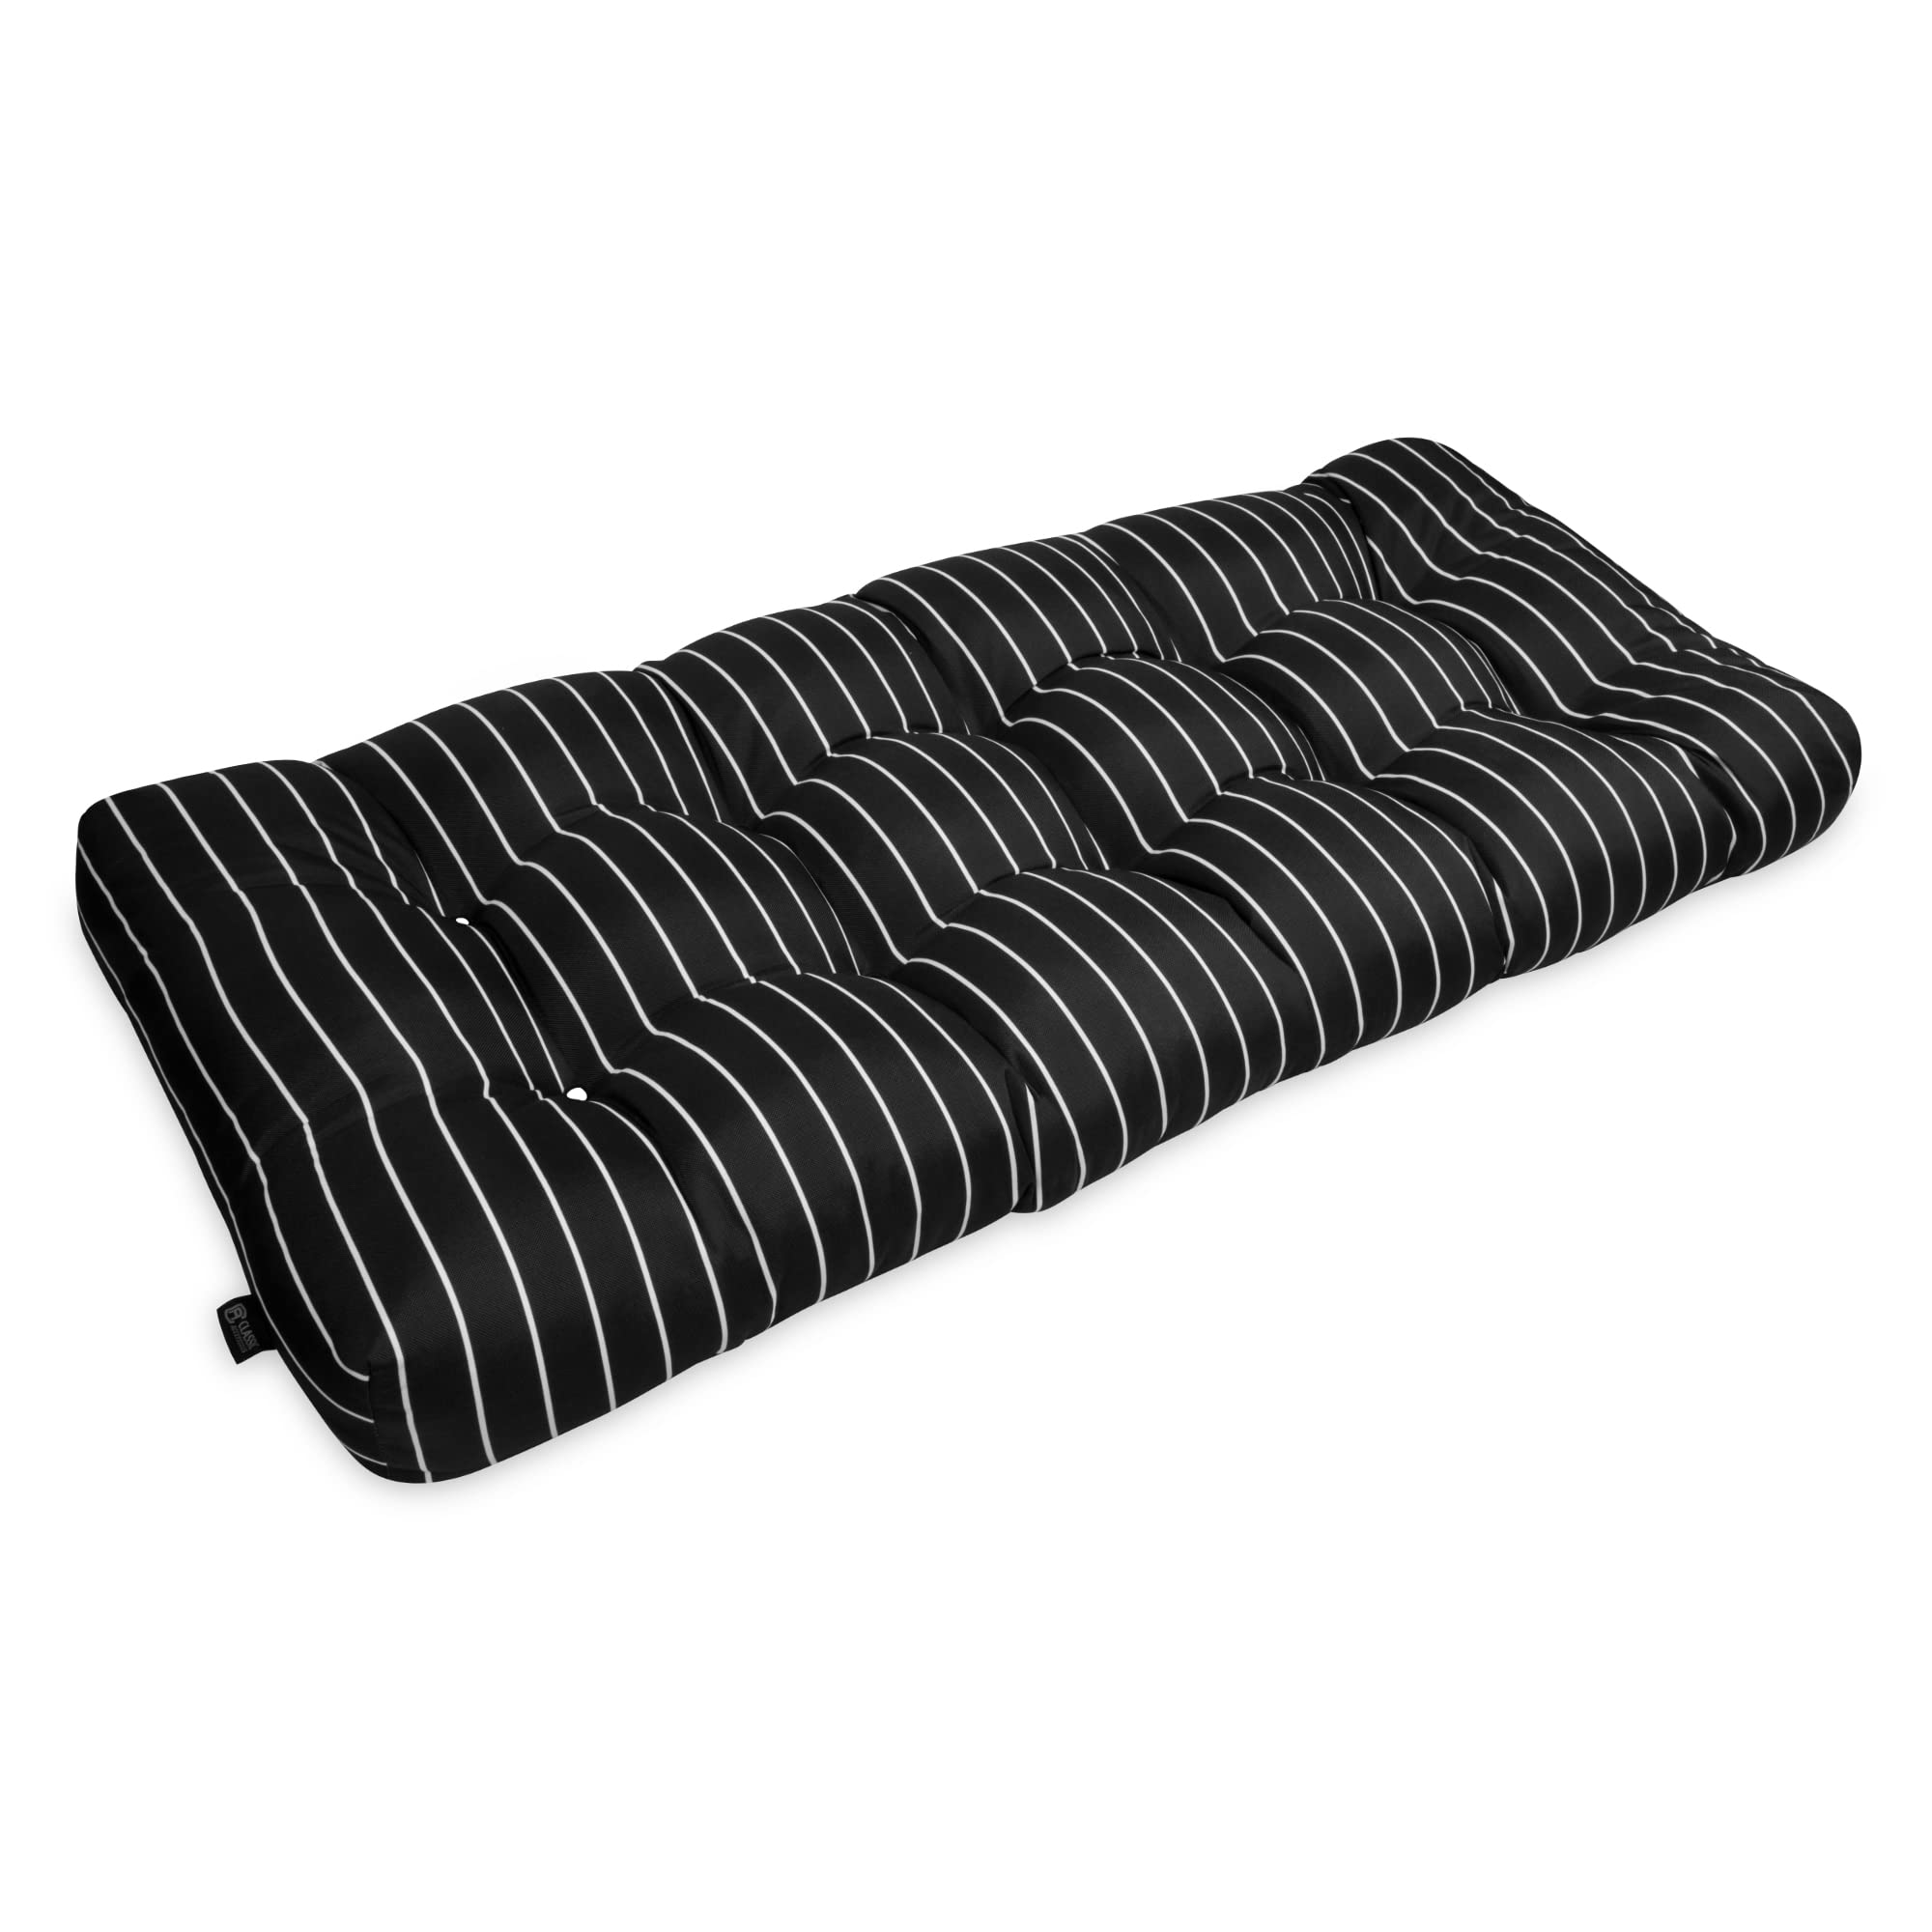 Classic Accessories 62-268-010401-EC Classic Patio Bench Cushion, Black Ink, Stripe, 48" W x 18" D x 5" Thick $22.09 + Free Shipping w/ Prime or on $35+